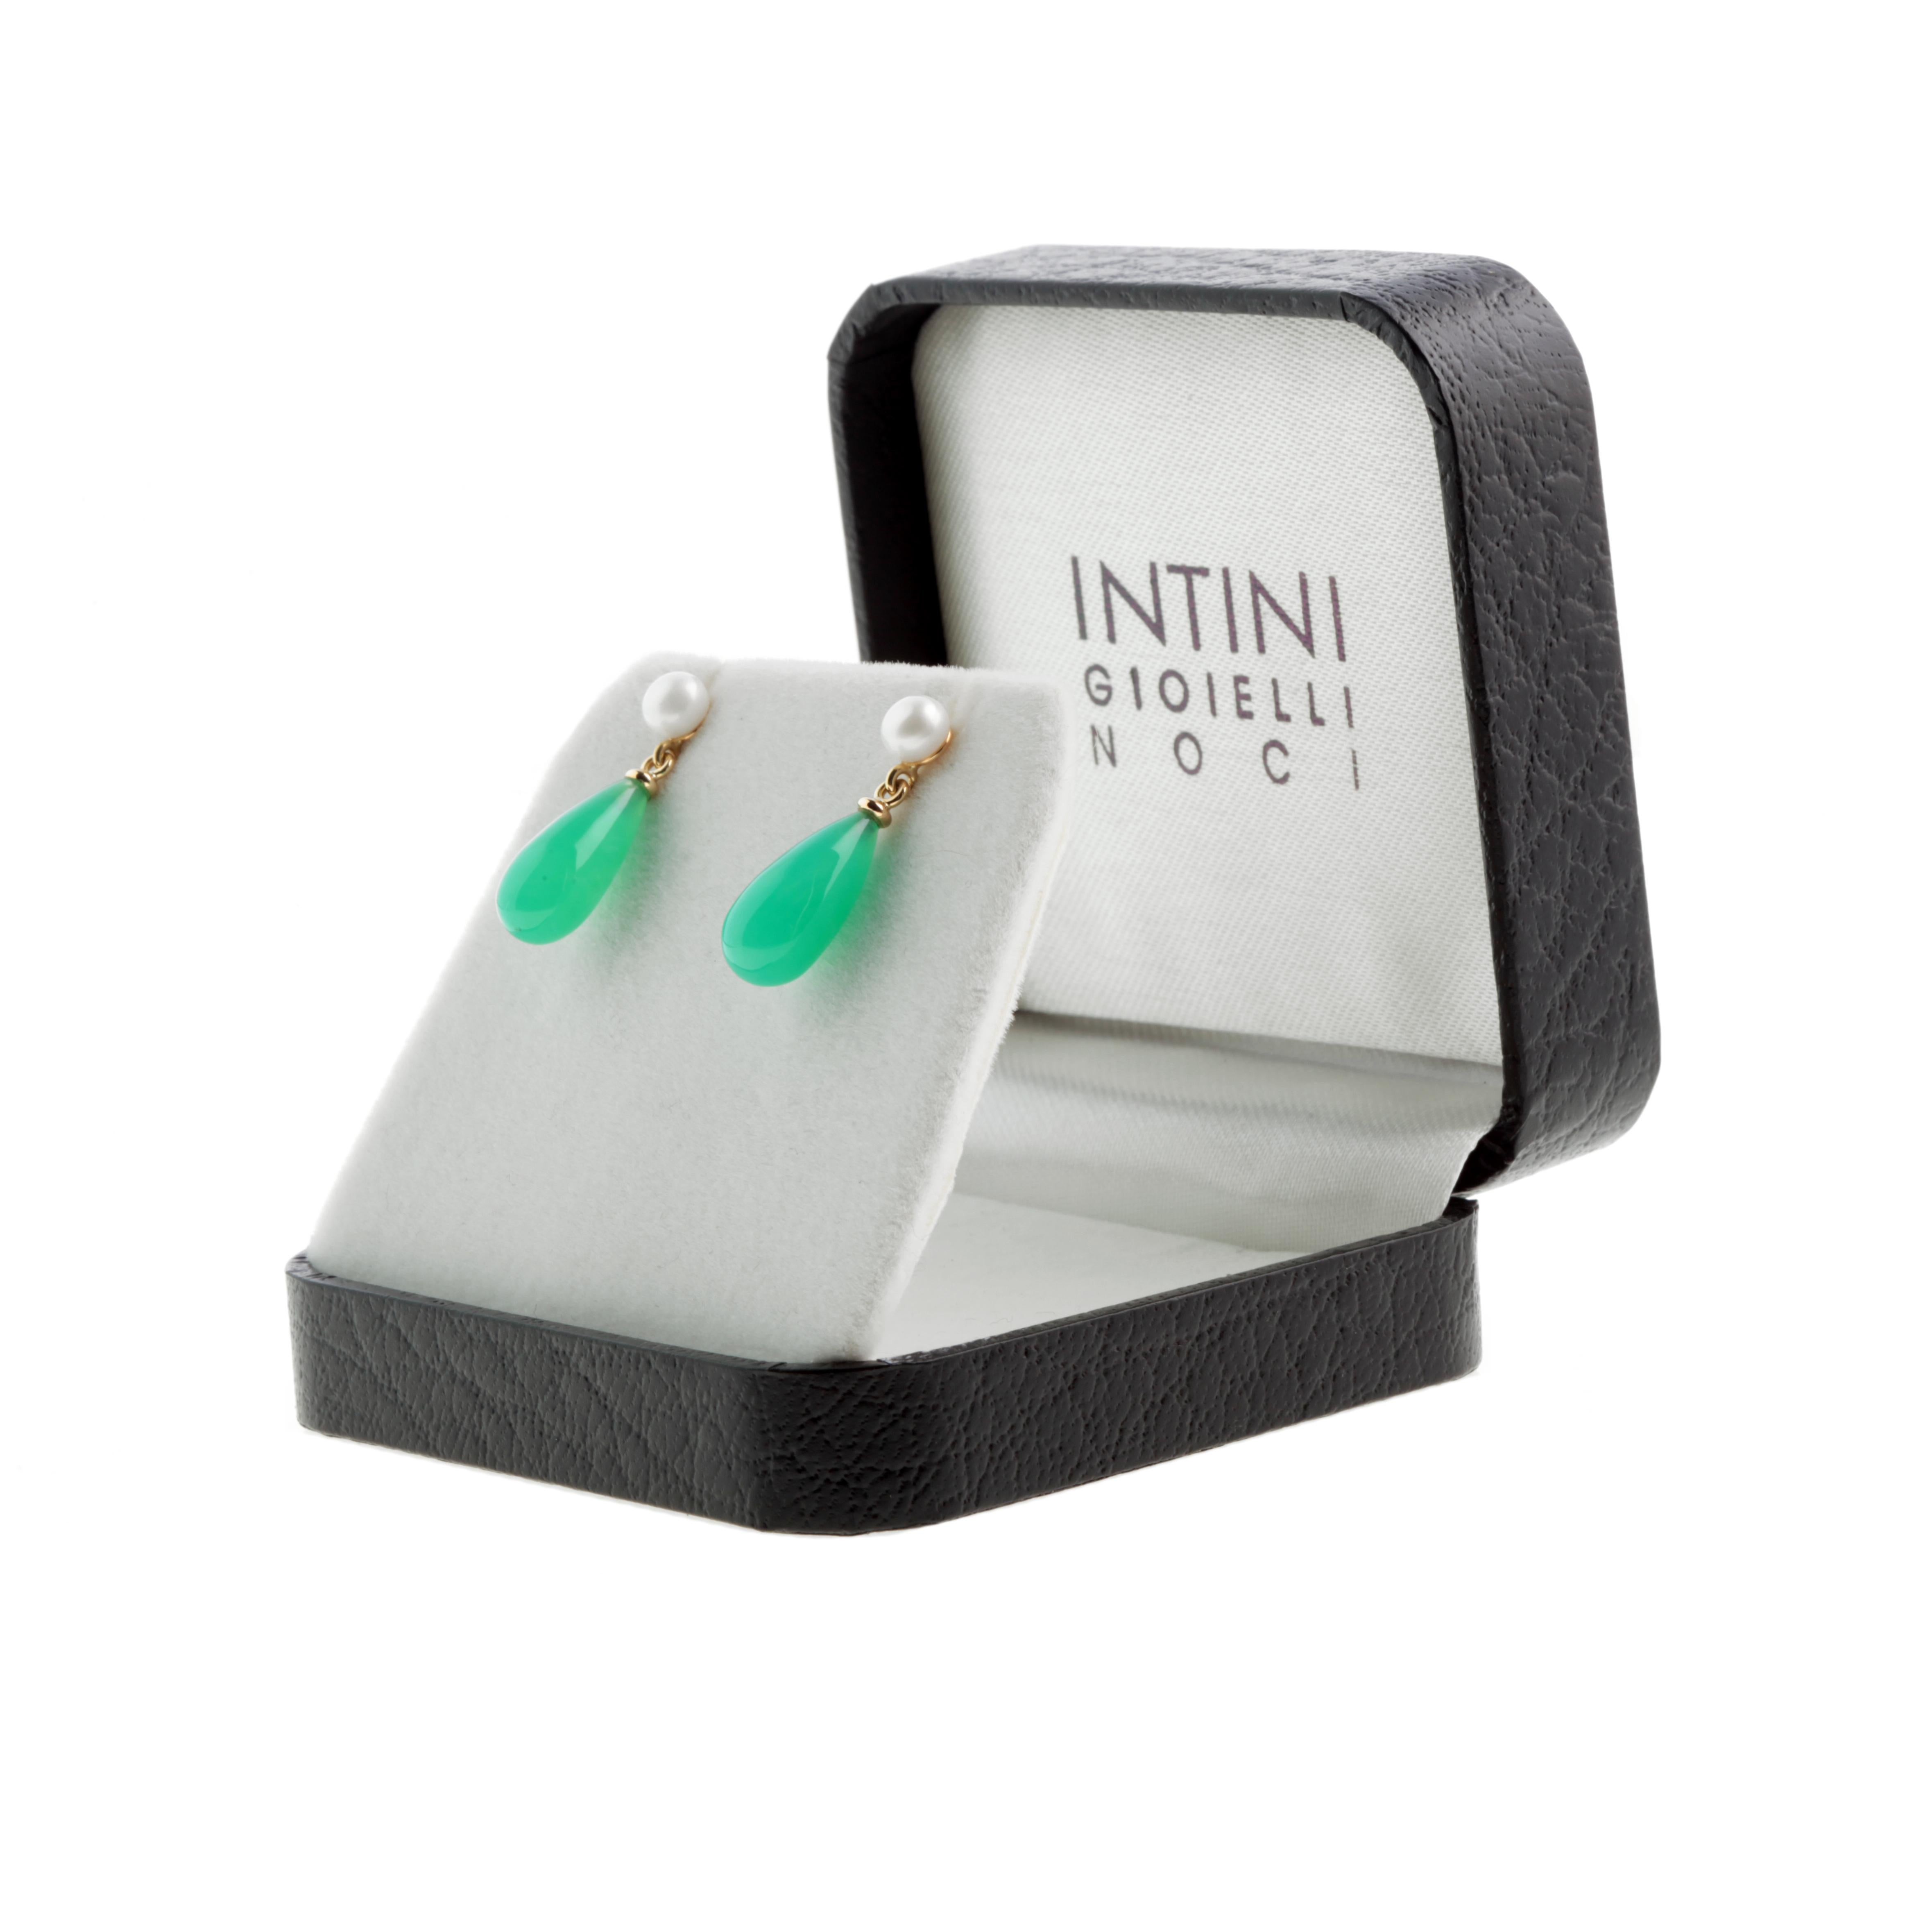 Dreamy translucent green chrysophrase pear briolette earrings, embellished with freshwater natiral pearls and 18 karat yellow gold in a unique drop tear-pear shape. Let Intini Jewels, our traditonal Handmade Milanese brand, surprise you with